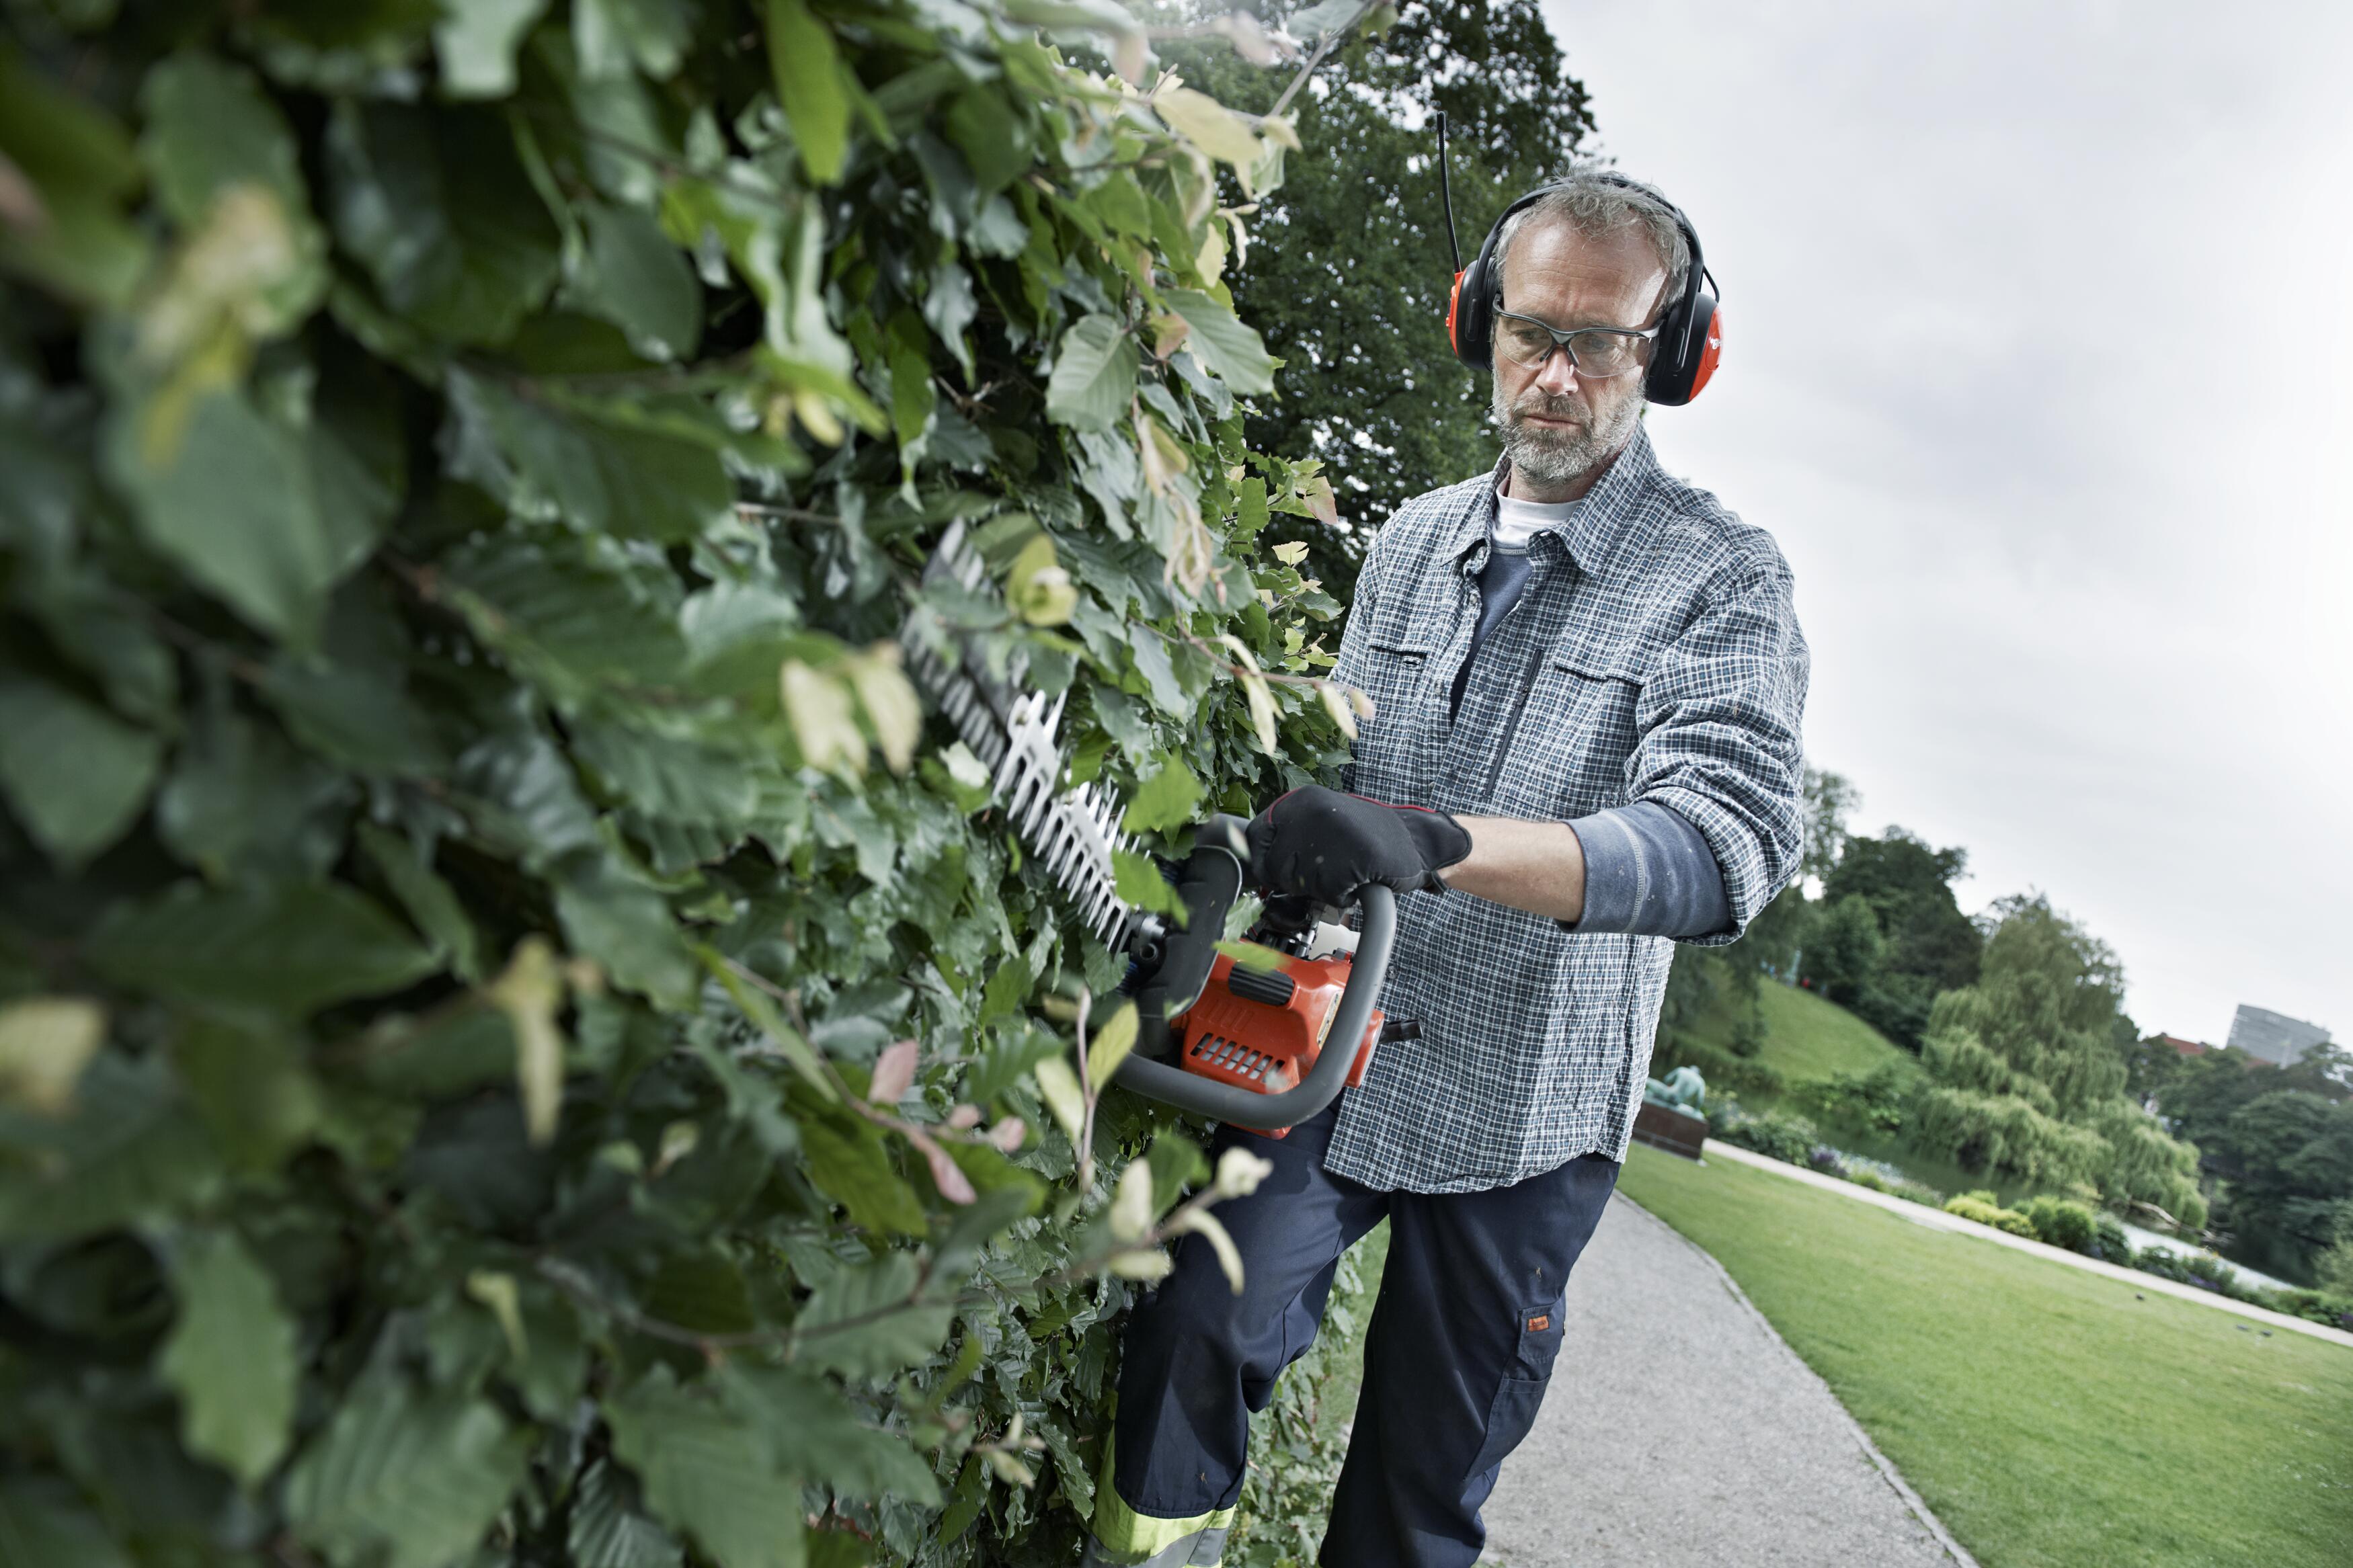 Husqvarna Hedge Trimmers are safe, all-round and comfortable to use